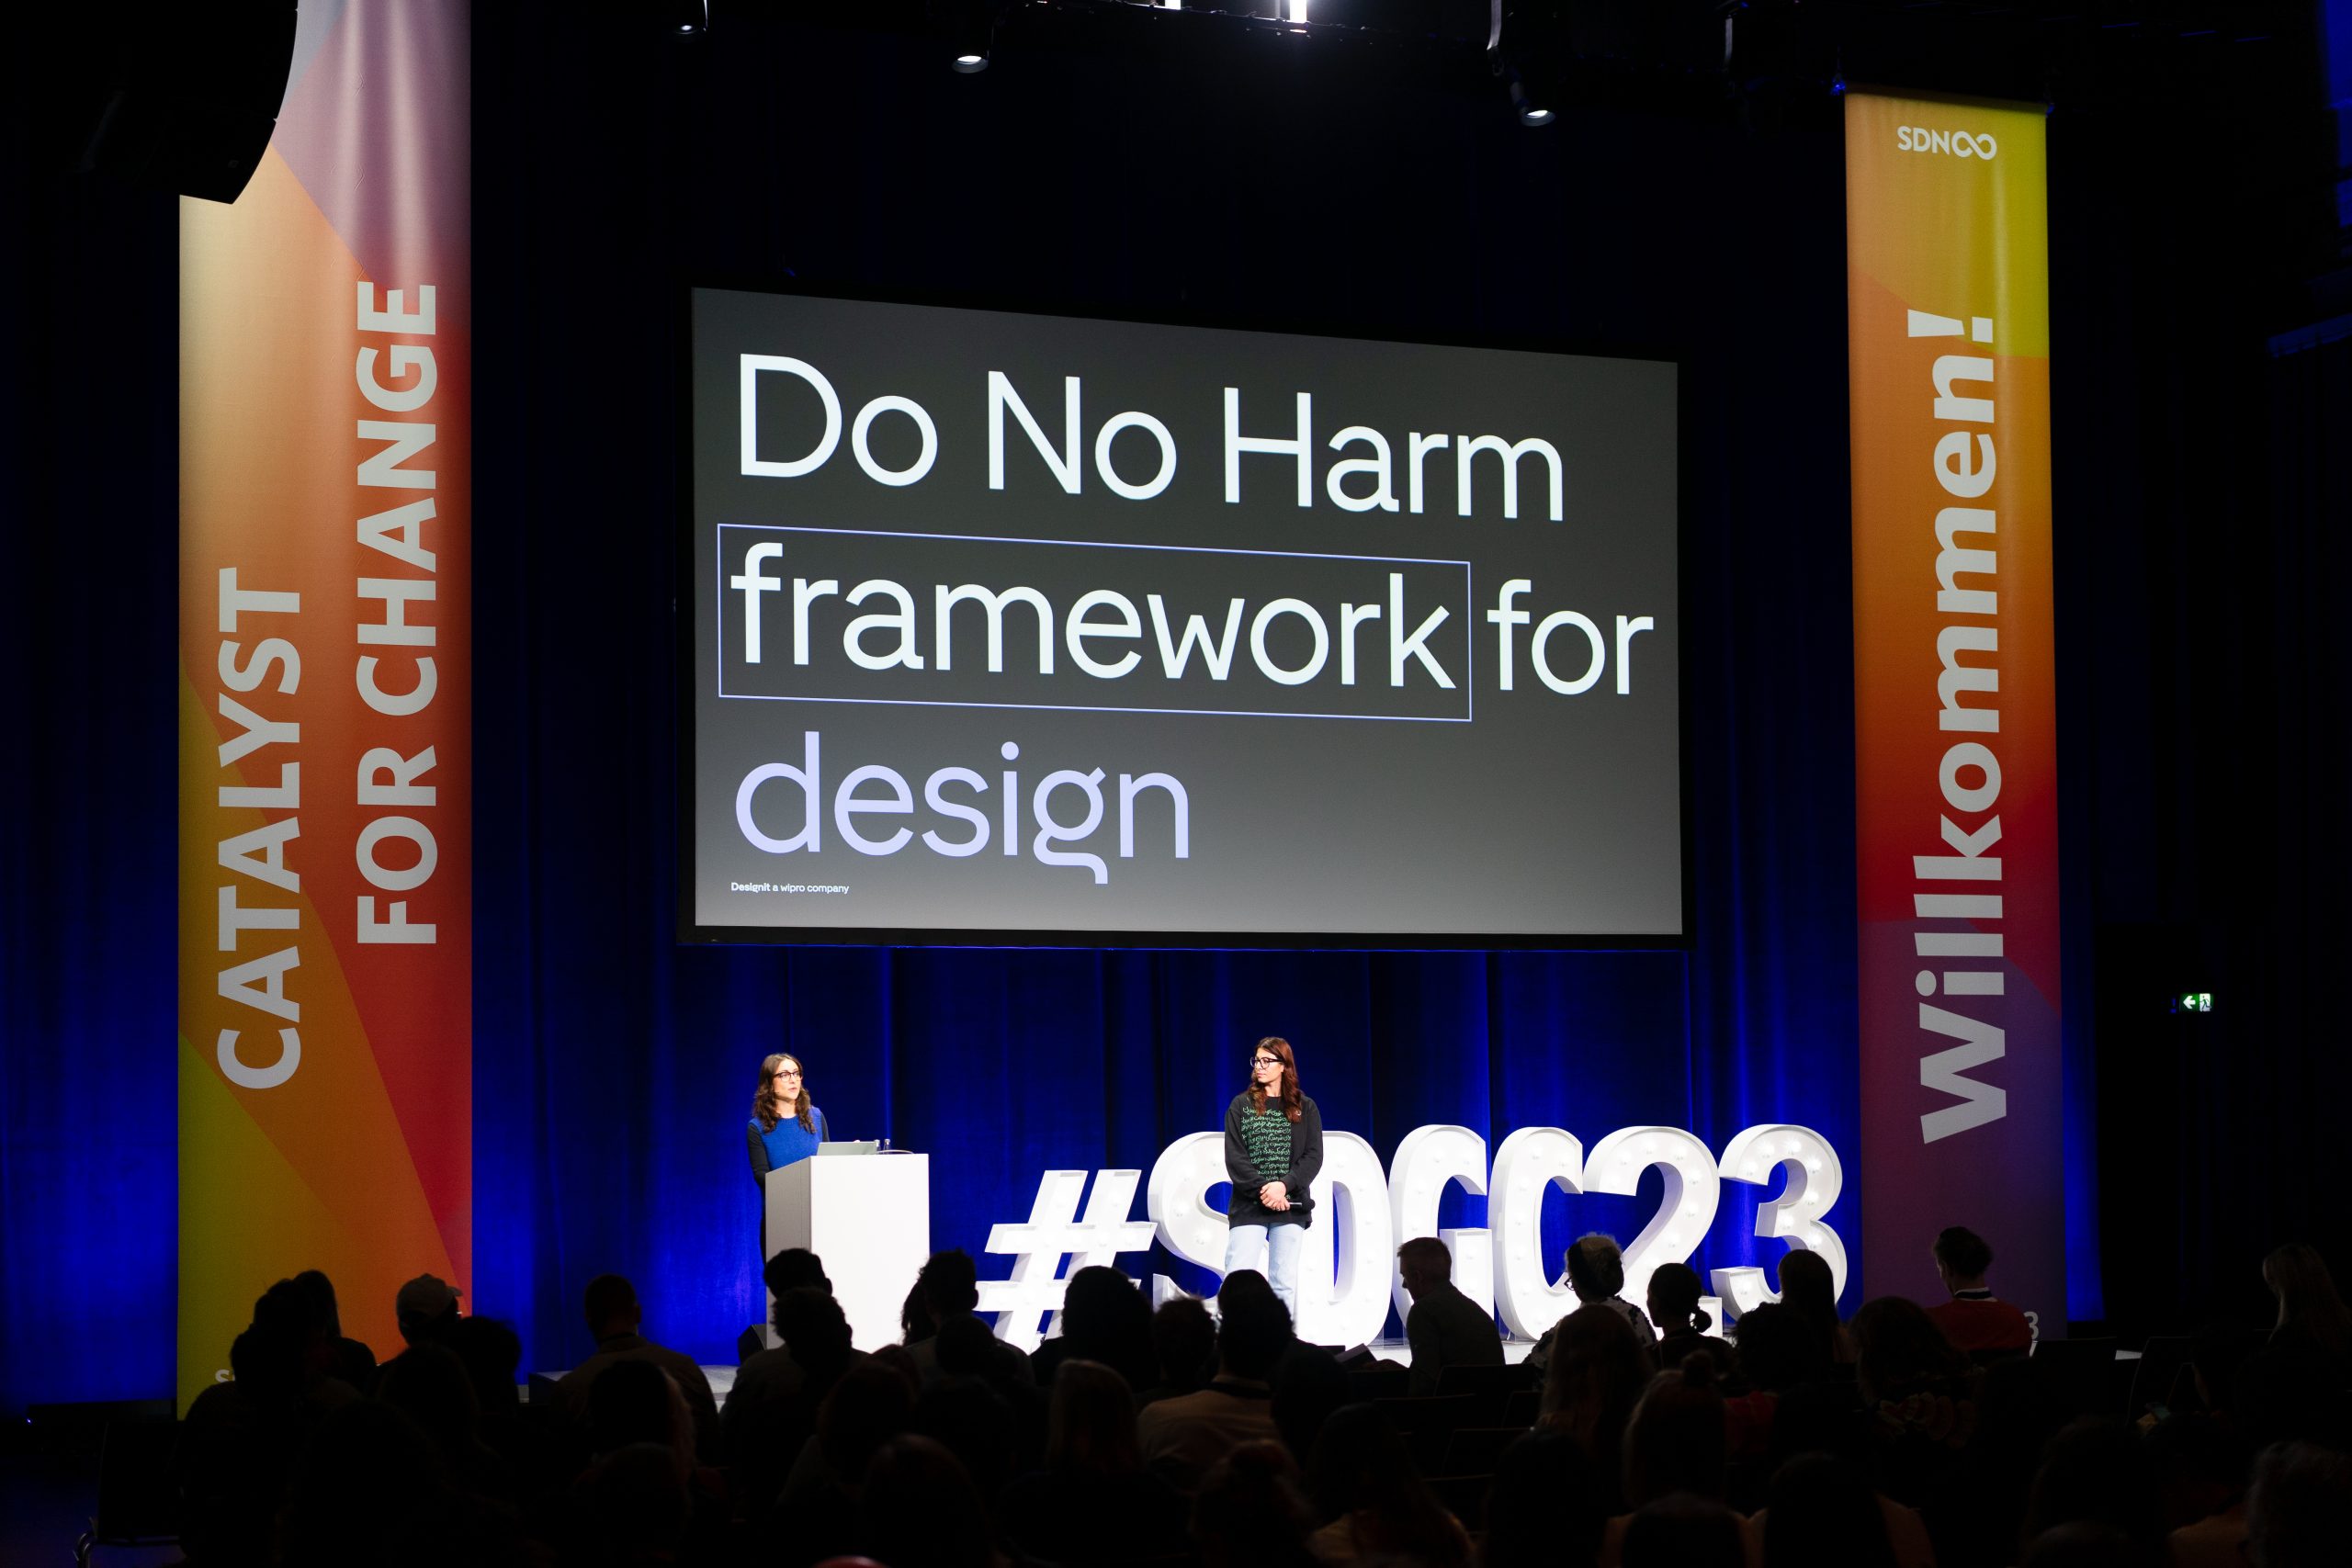 'Do No Harm' Framework For Design, Underscores The Responsibility Of Designers To Wield Their Influence Thoughtfully